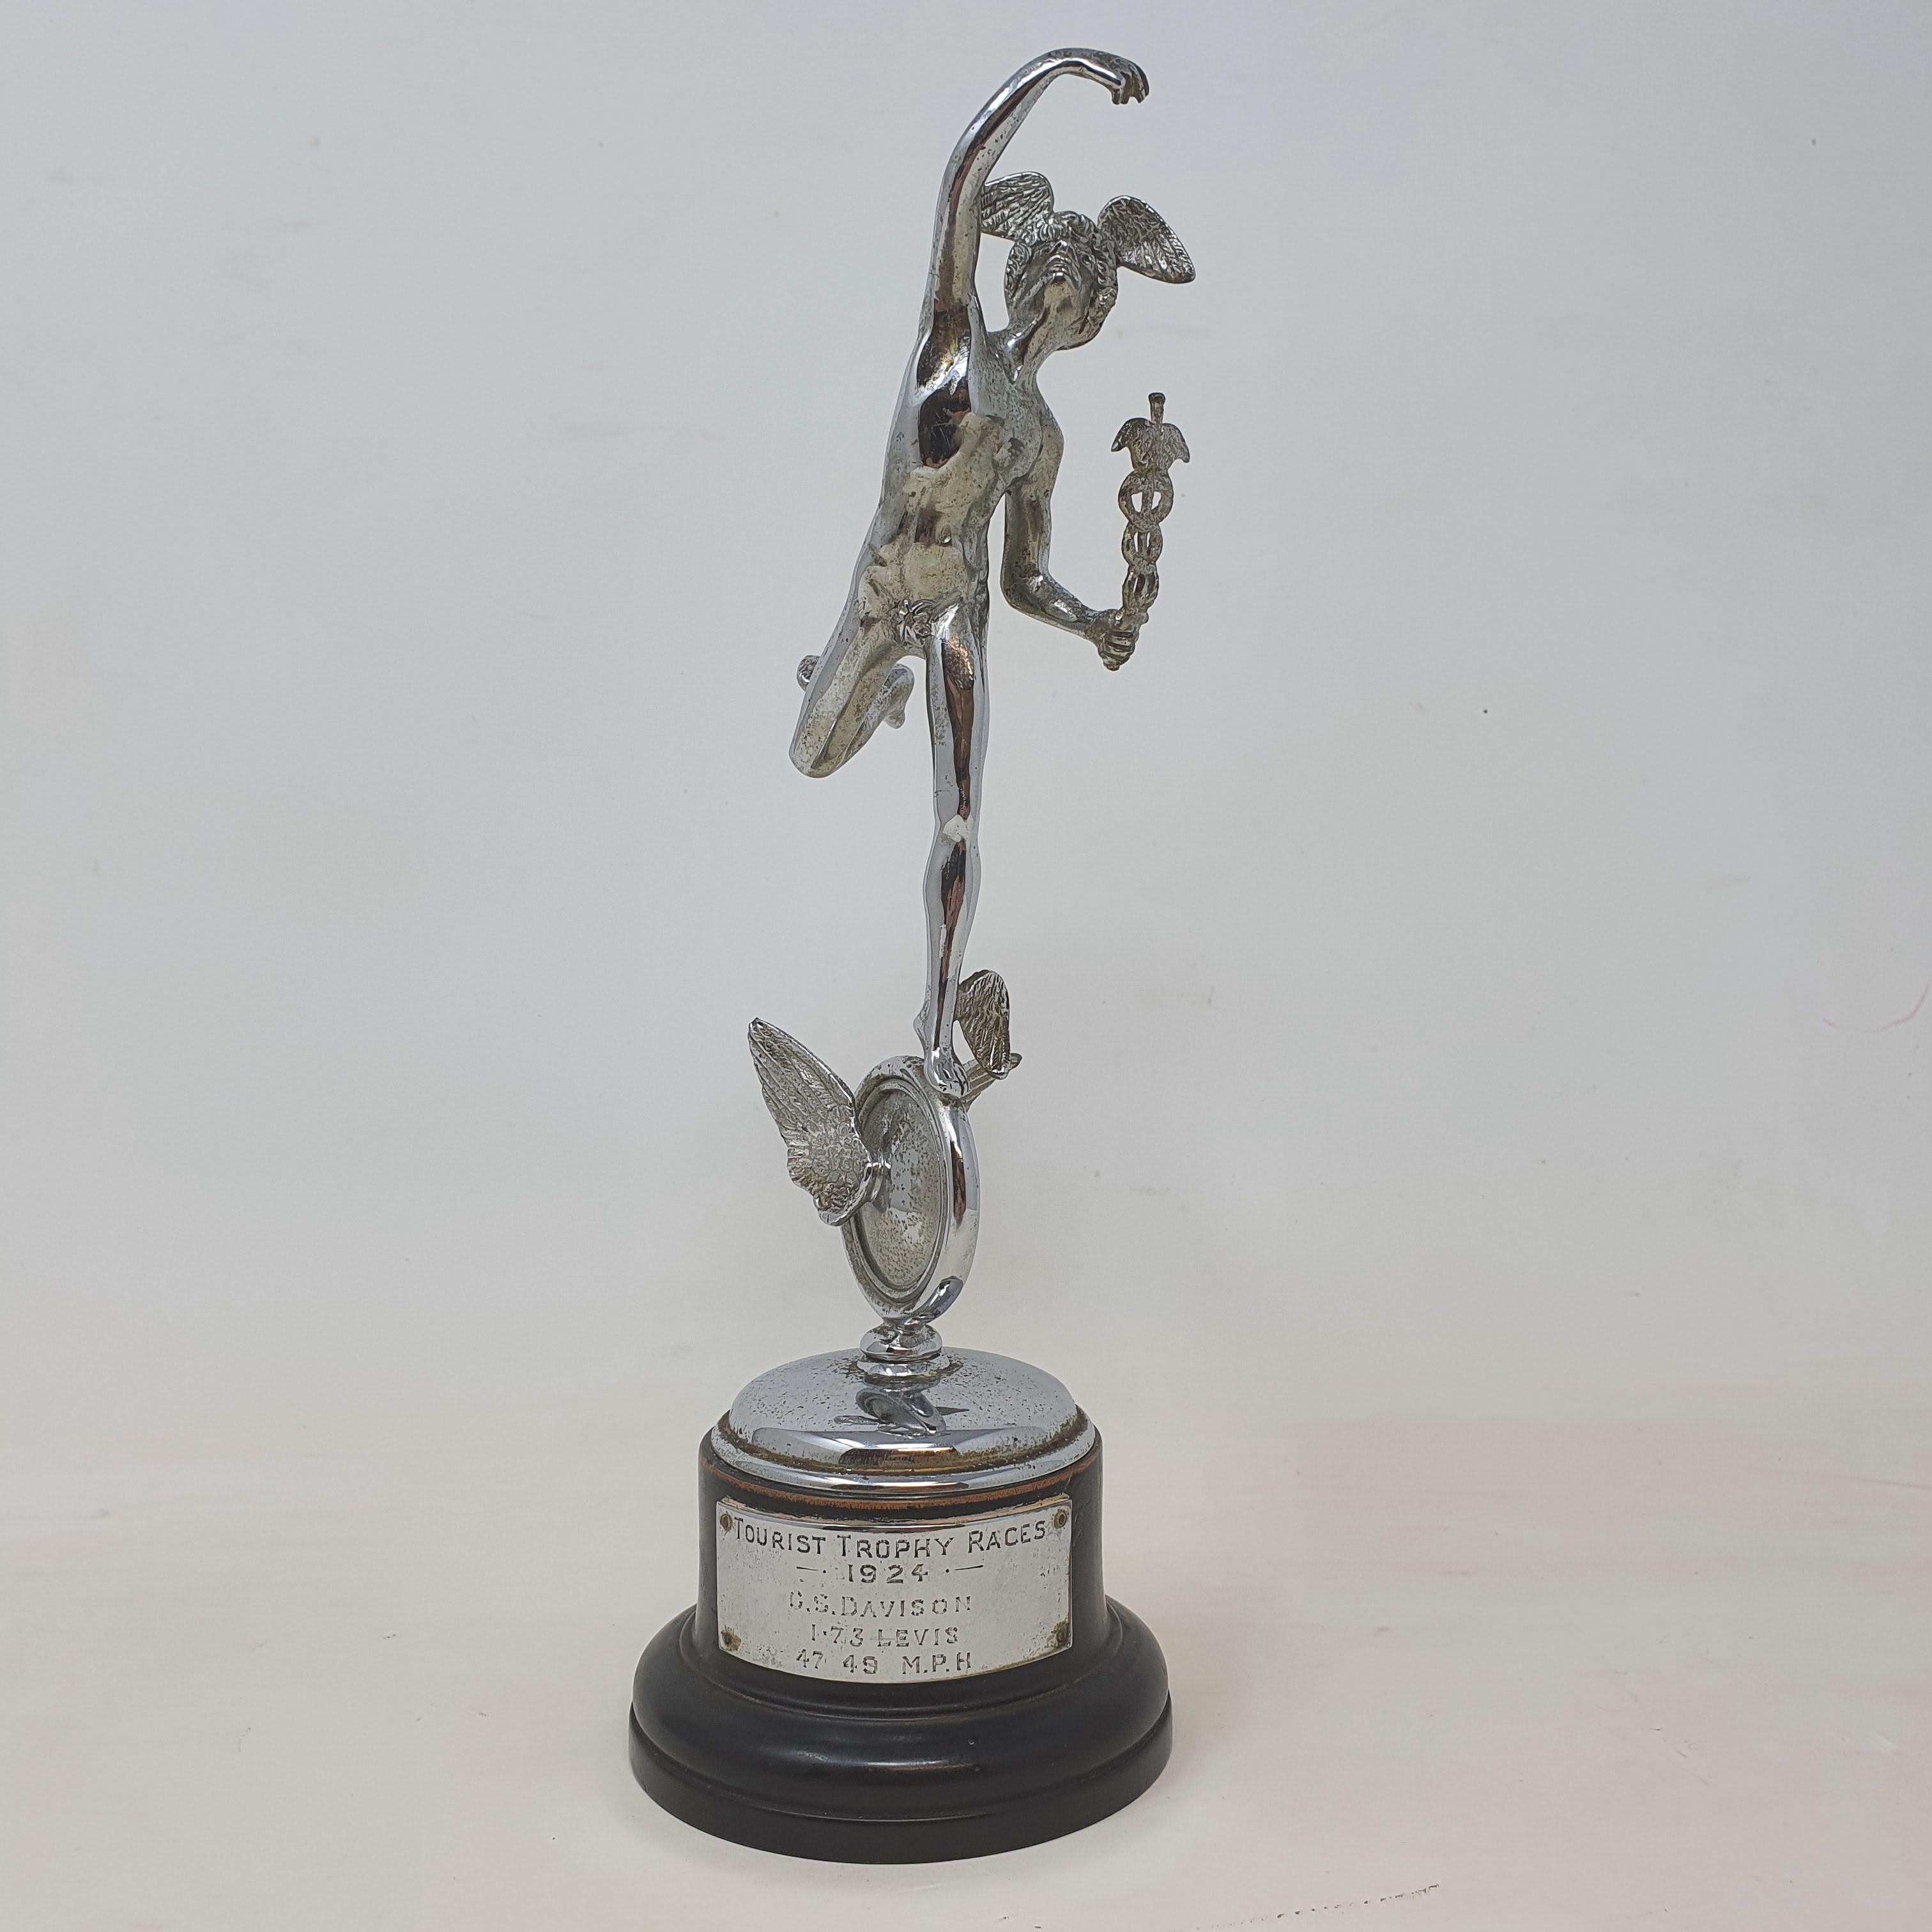 An Isle of Man TT silver replica trophy, 1924 award, mounted on a wooden plinth with applied